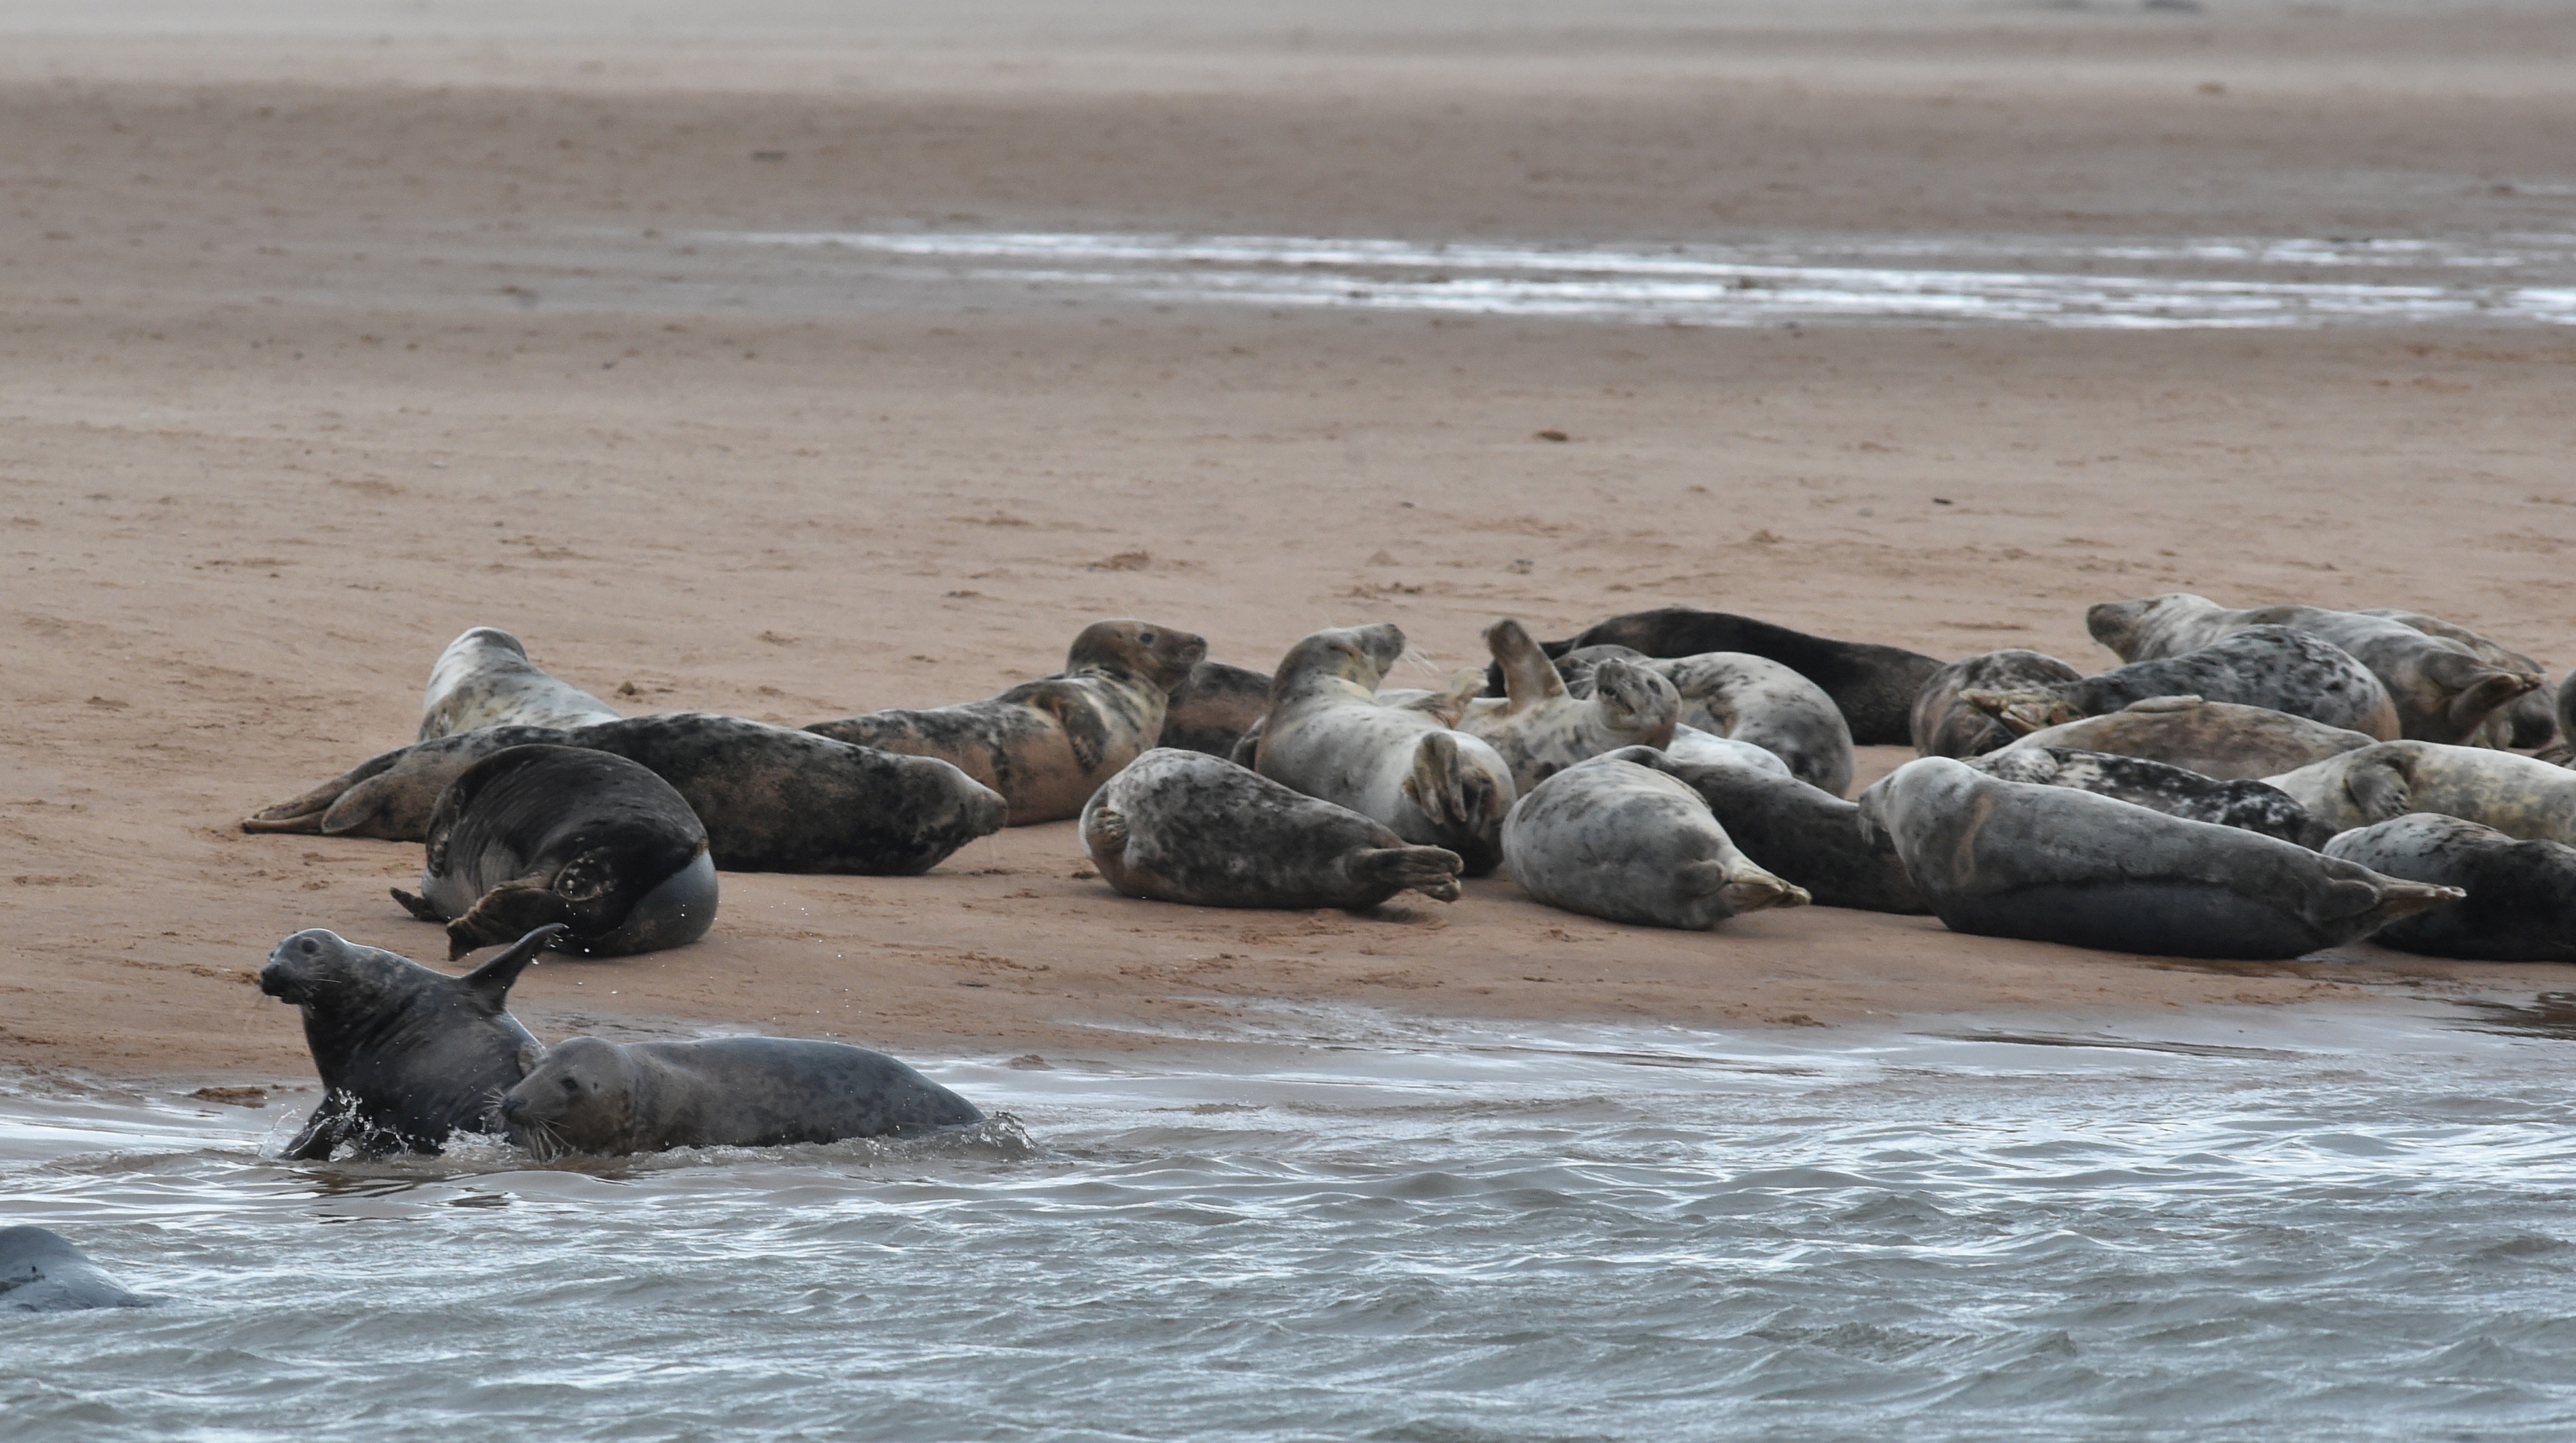 Seals at Newburgh beach - See story on the many seals in the area. Picture by COLIN RENNIE December 1, 2016.